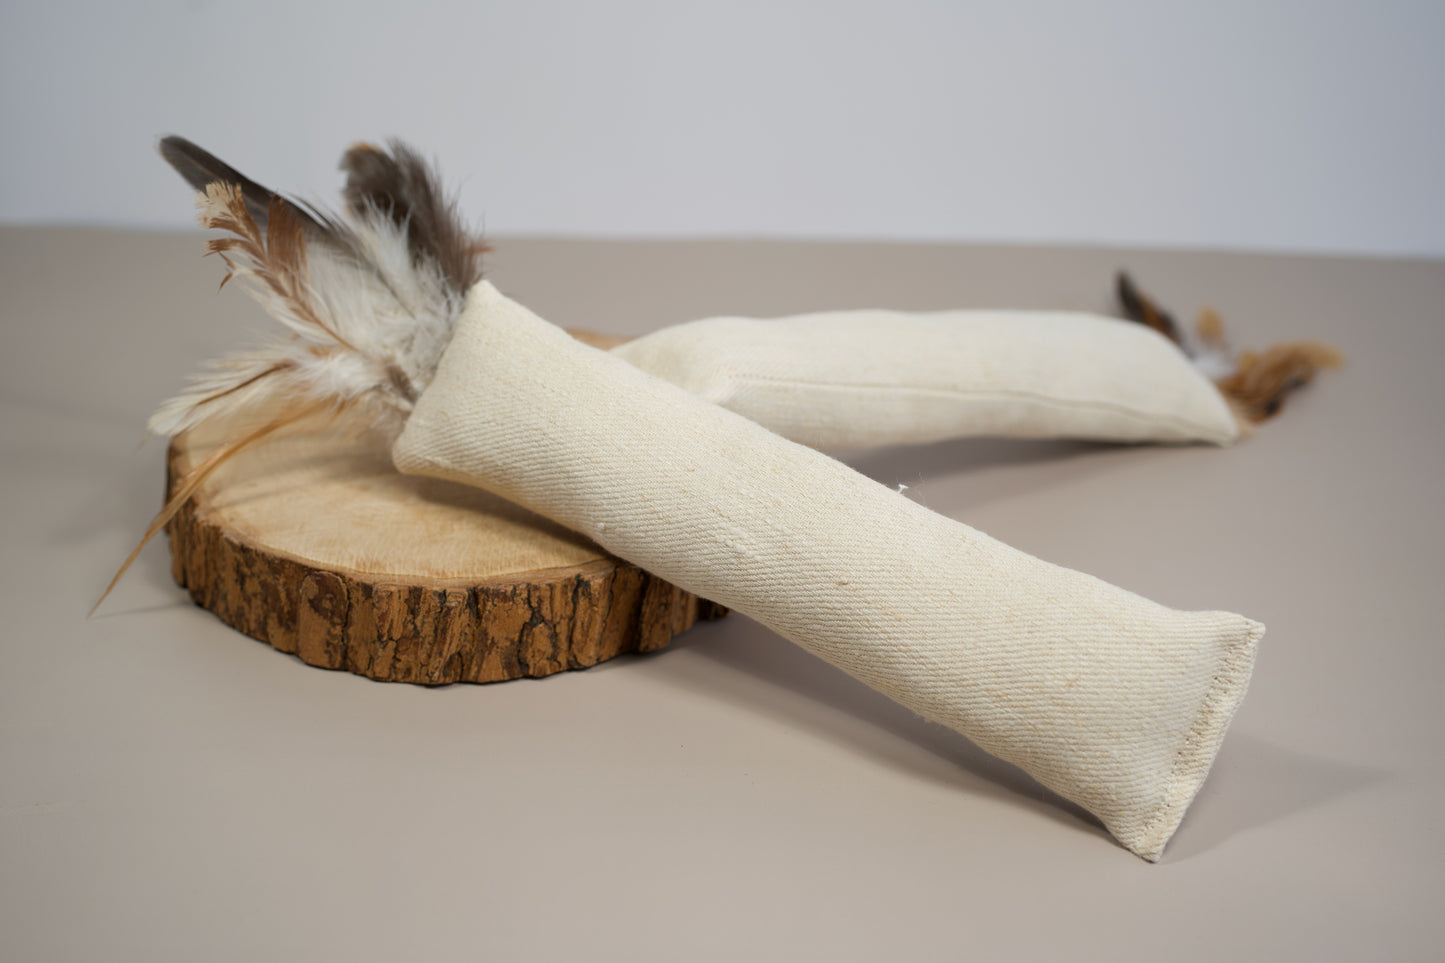 Natural cat kicker toy made with hemp fabric and natural feathers.